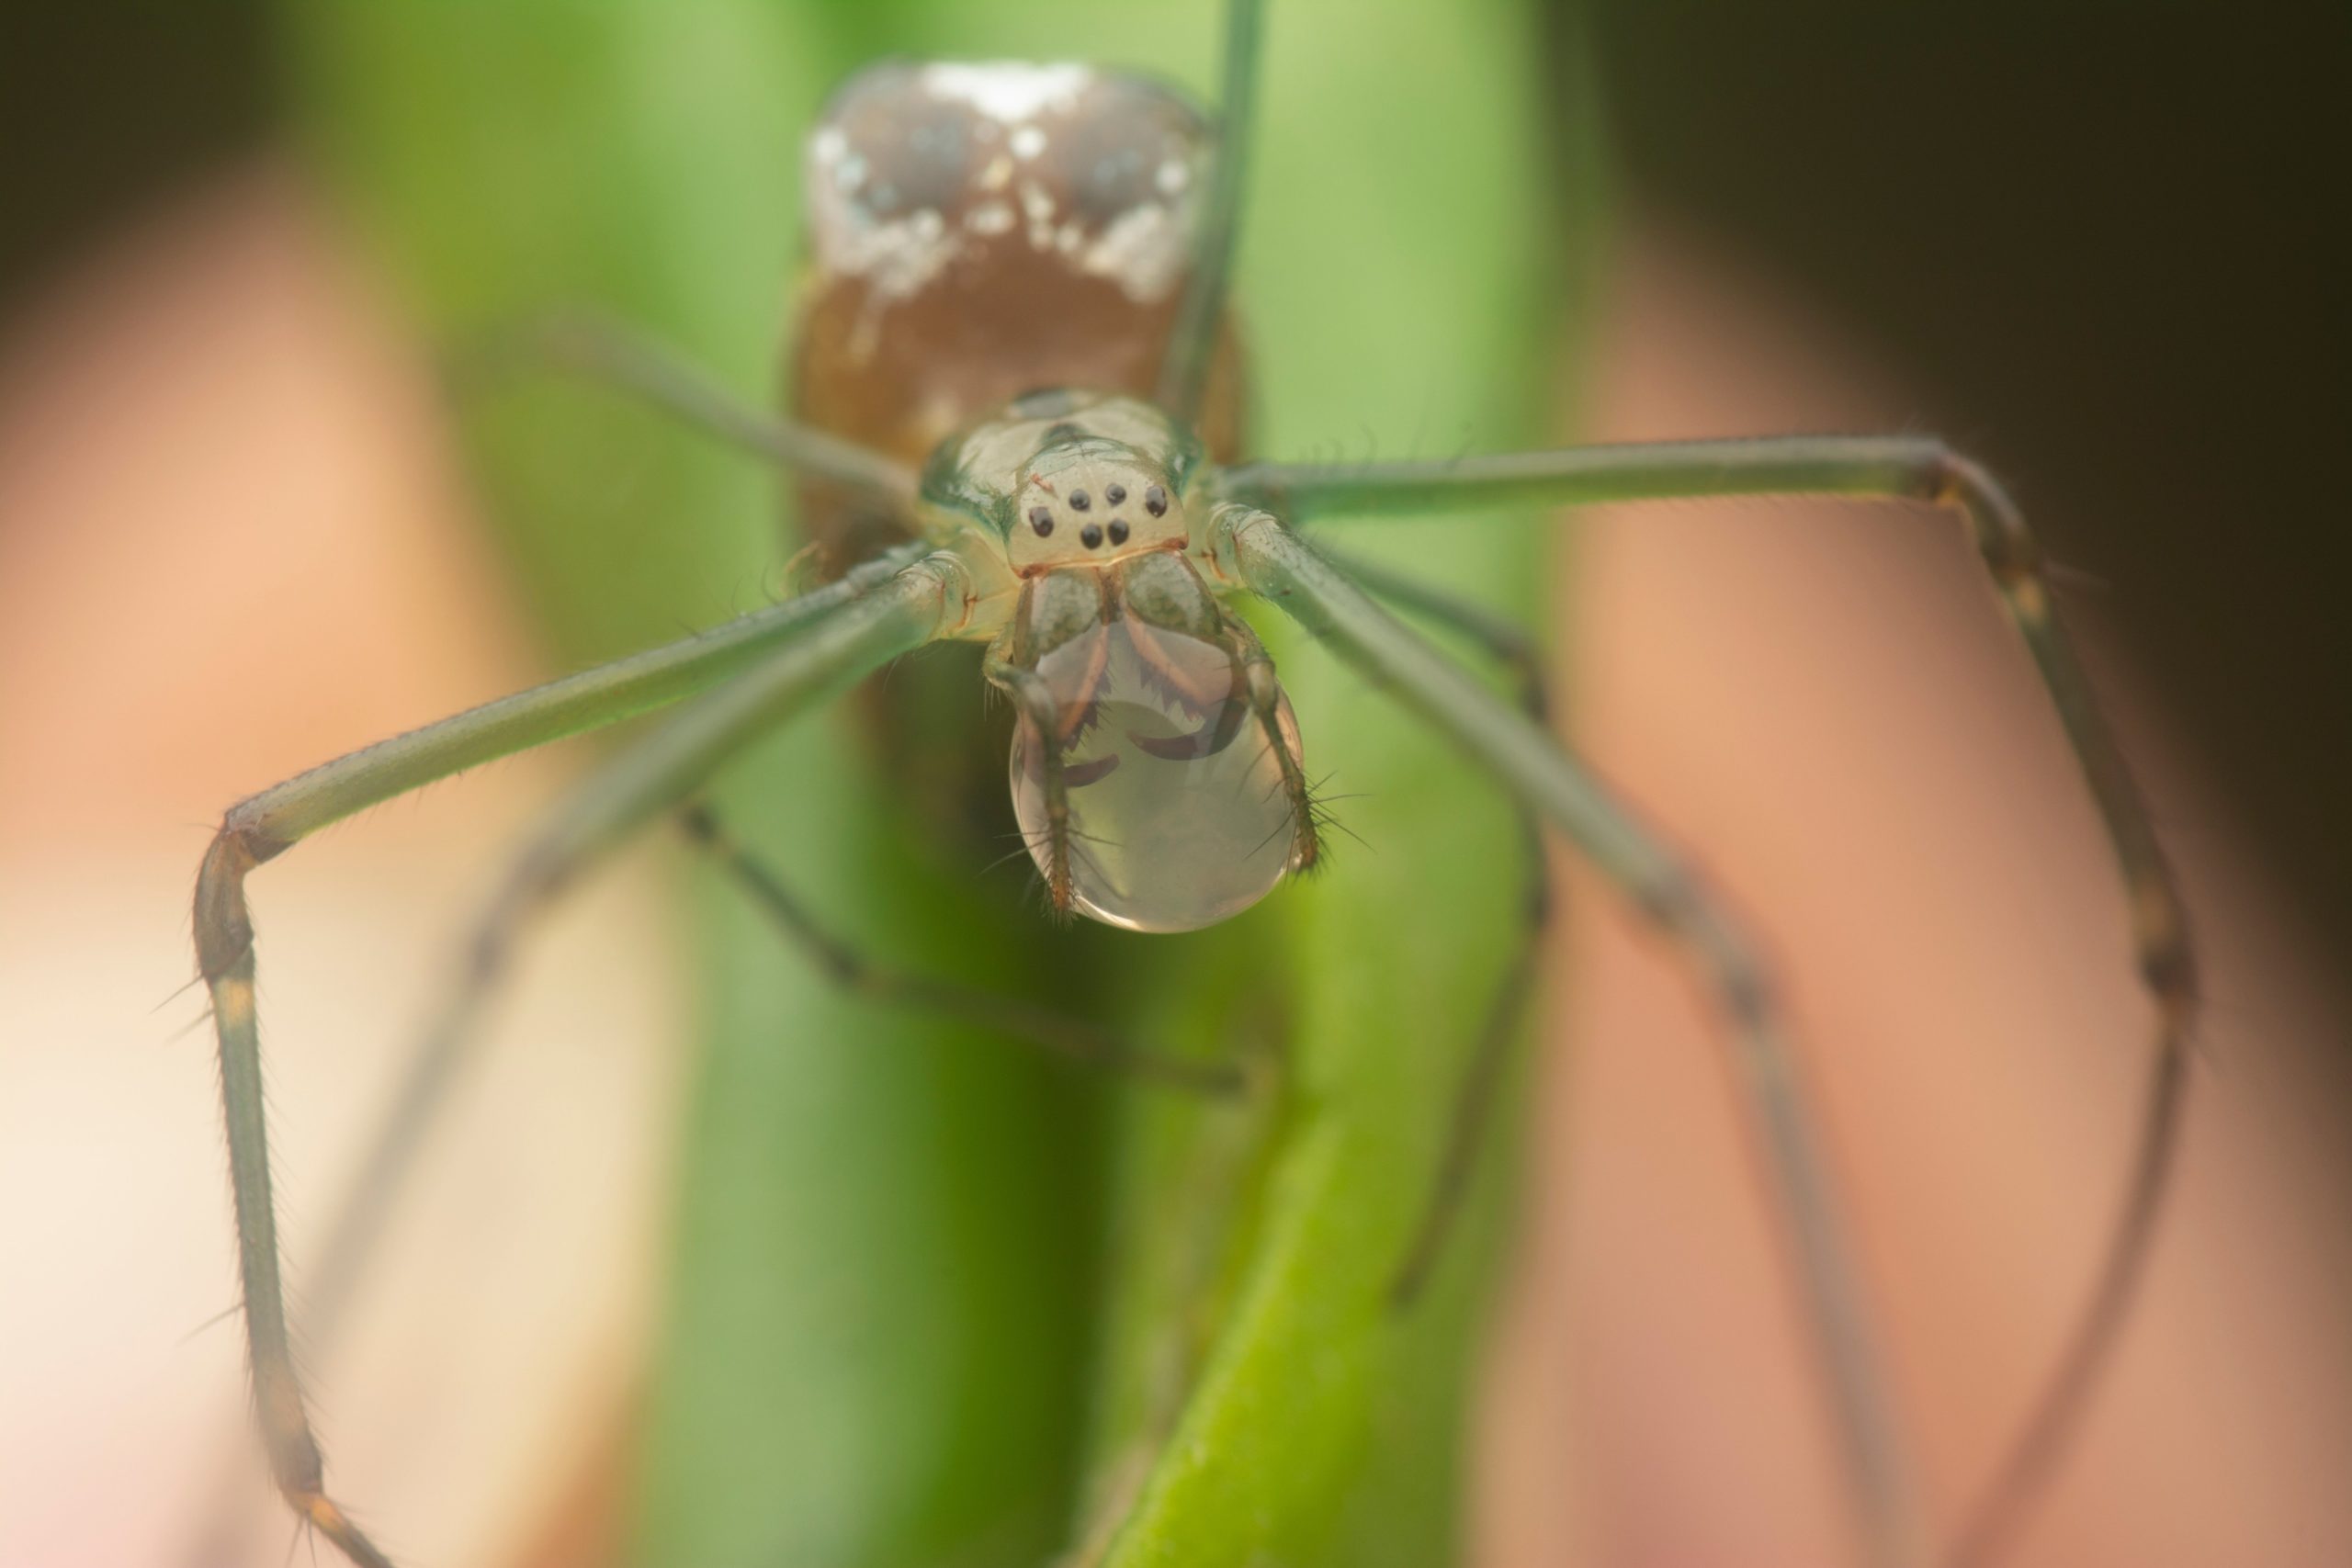 A long-jawed spider holding a droplet of water in its mouthparts. (Photo: Young Swee Ming, Shutterstock)